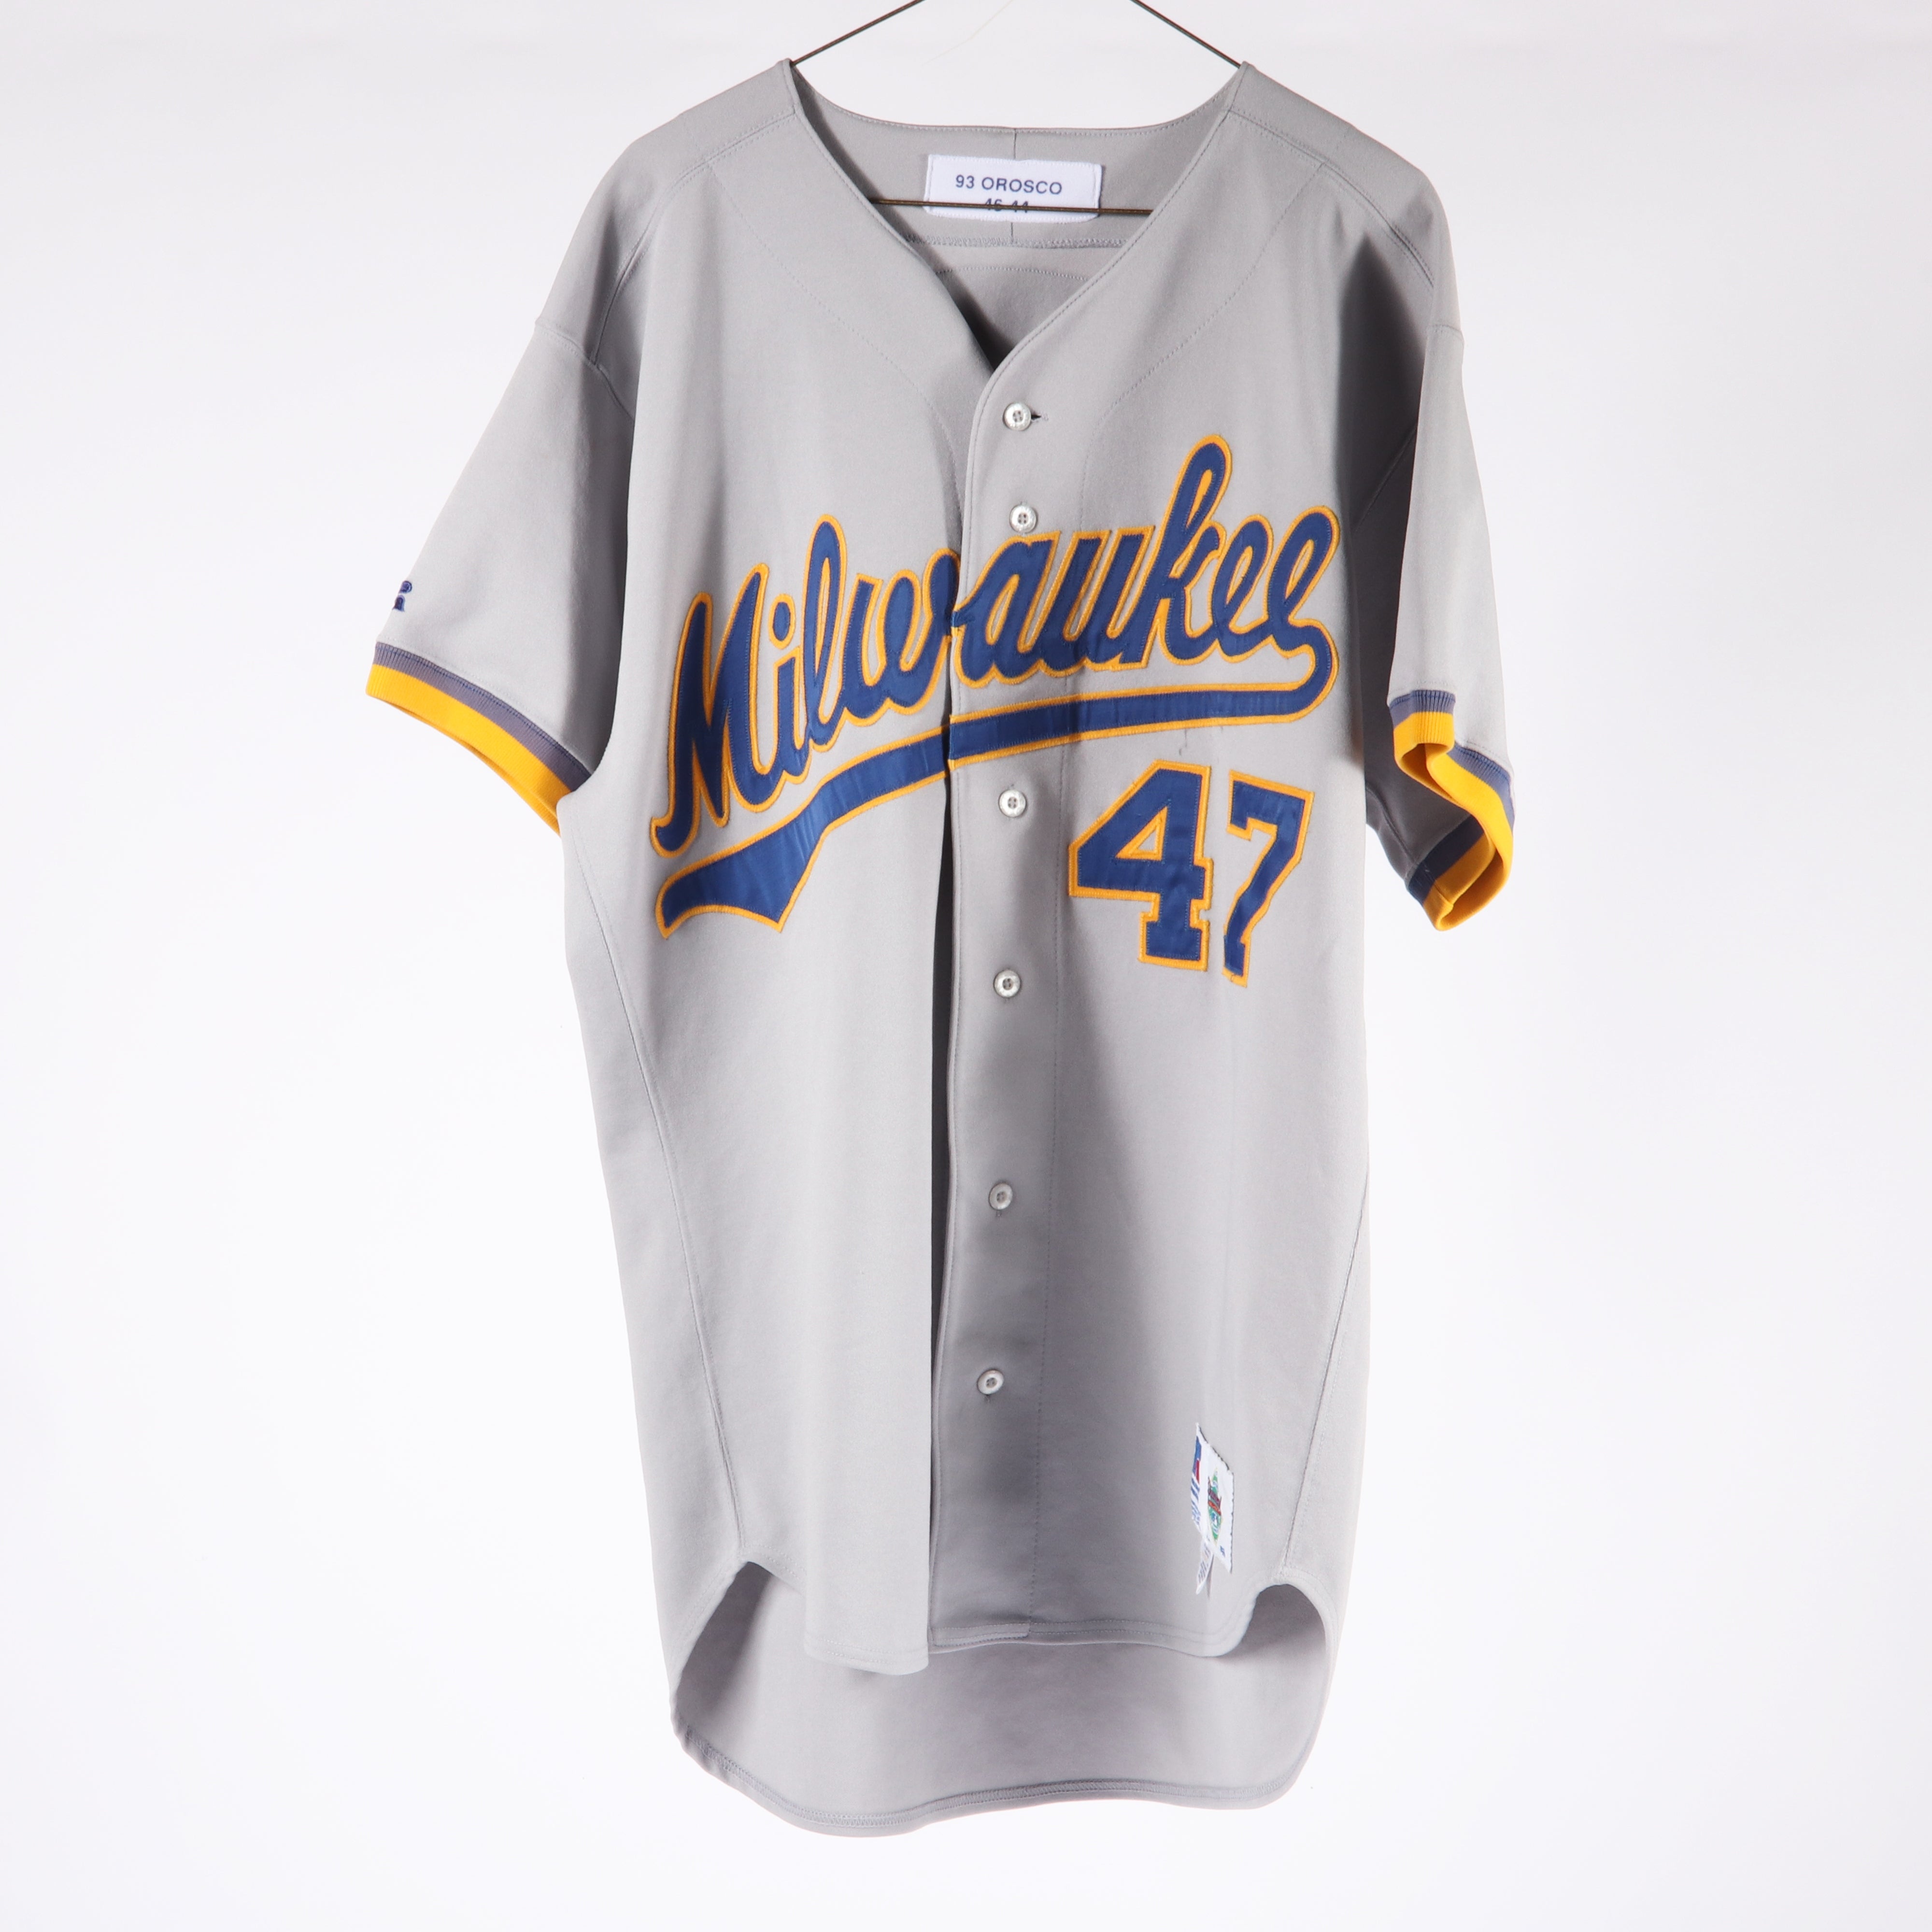  Brewers Jersey